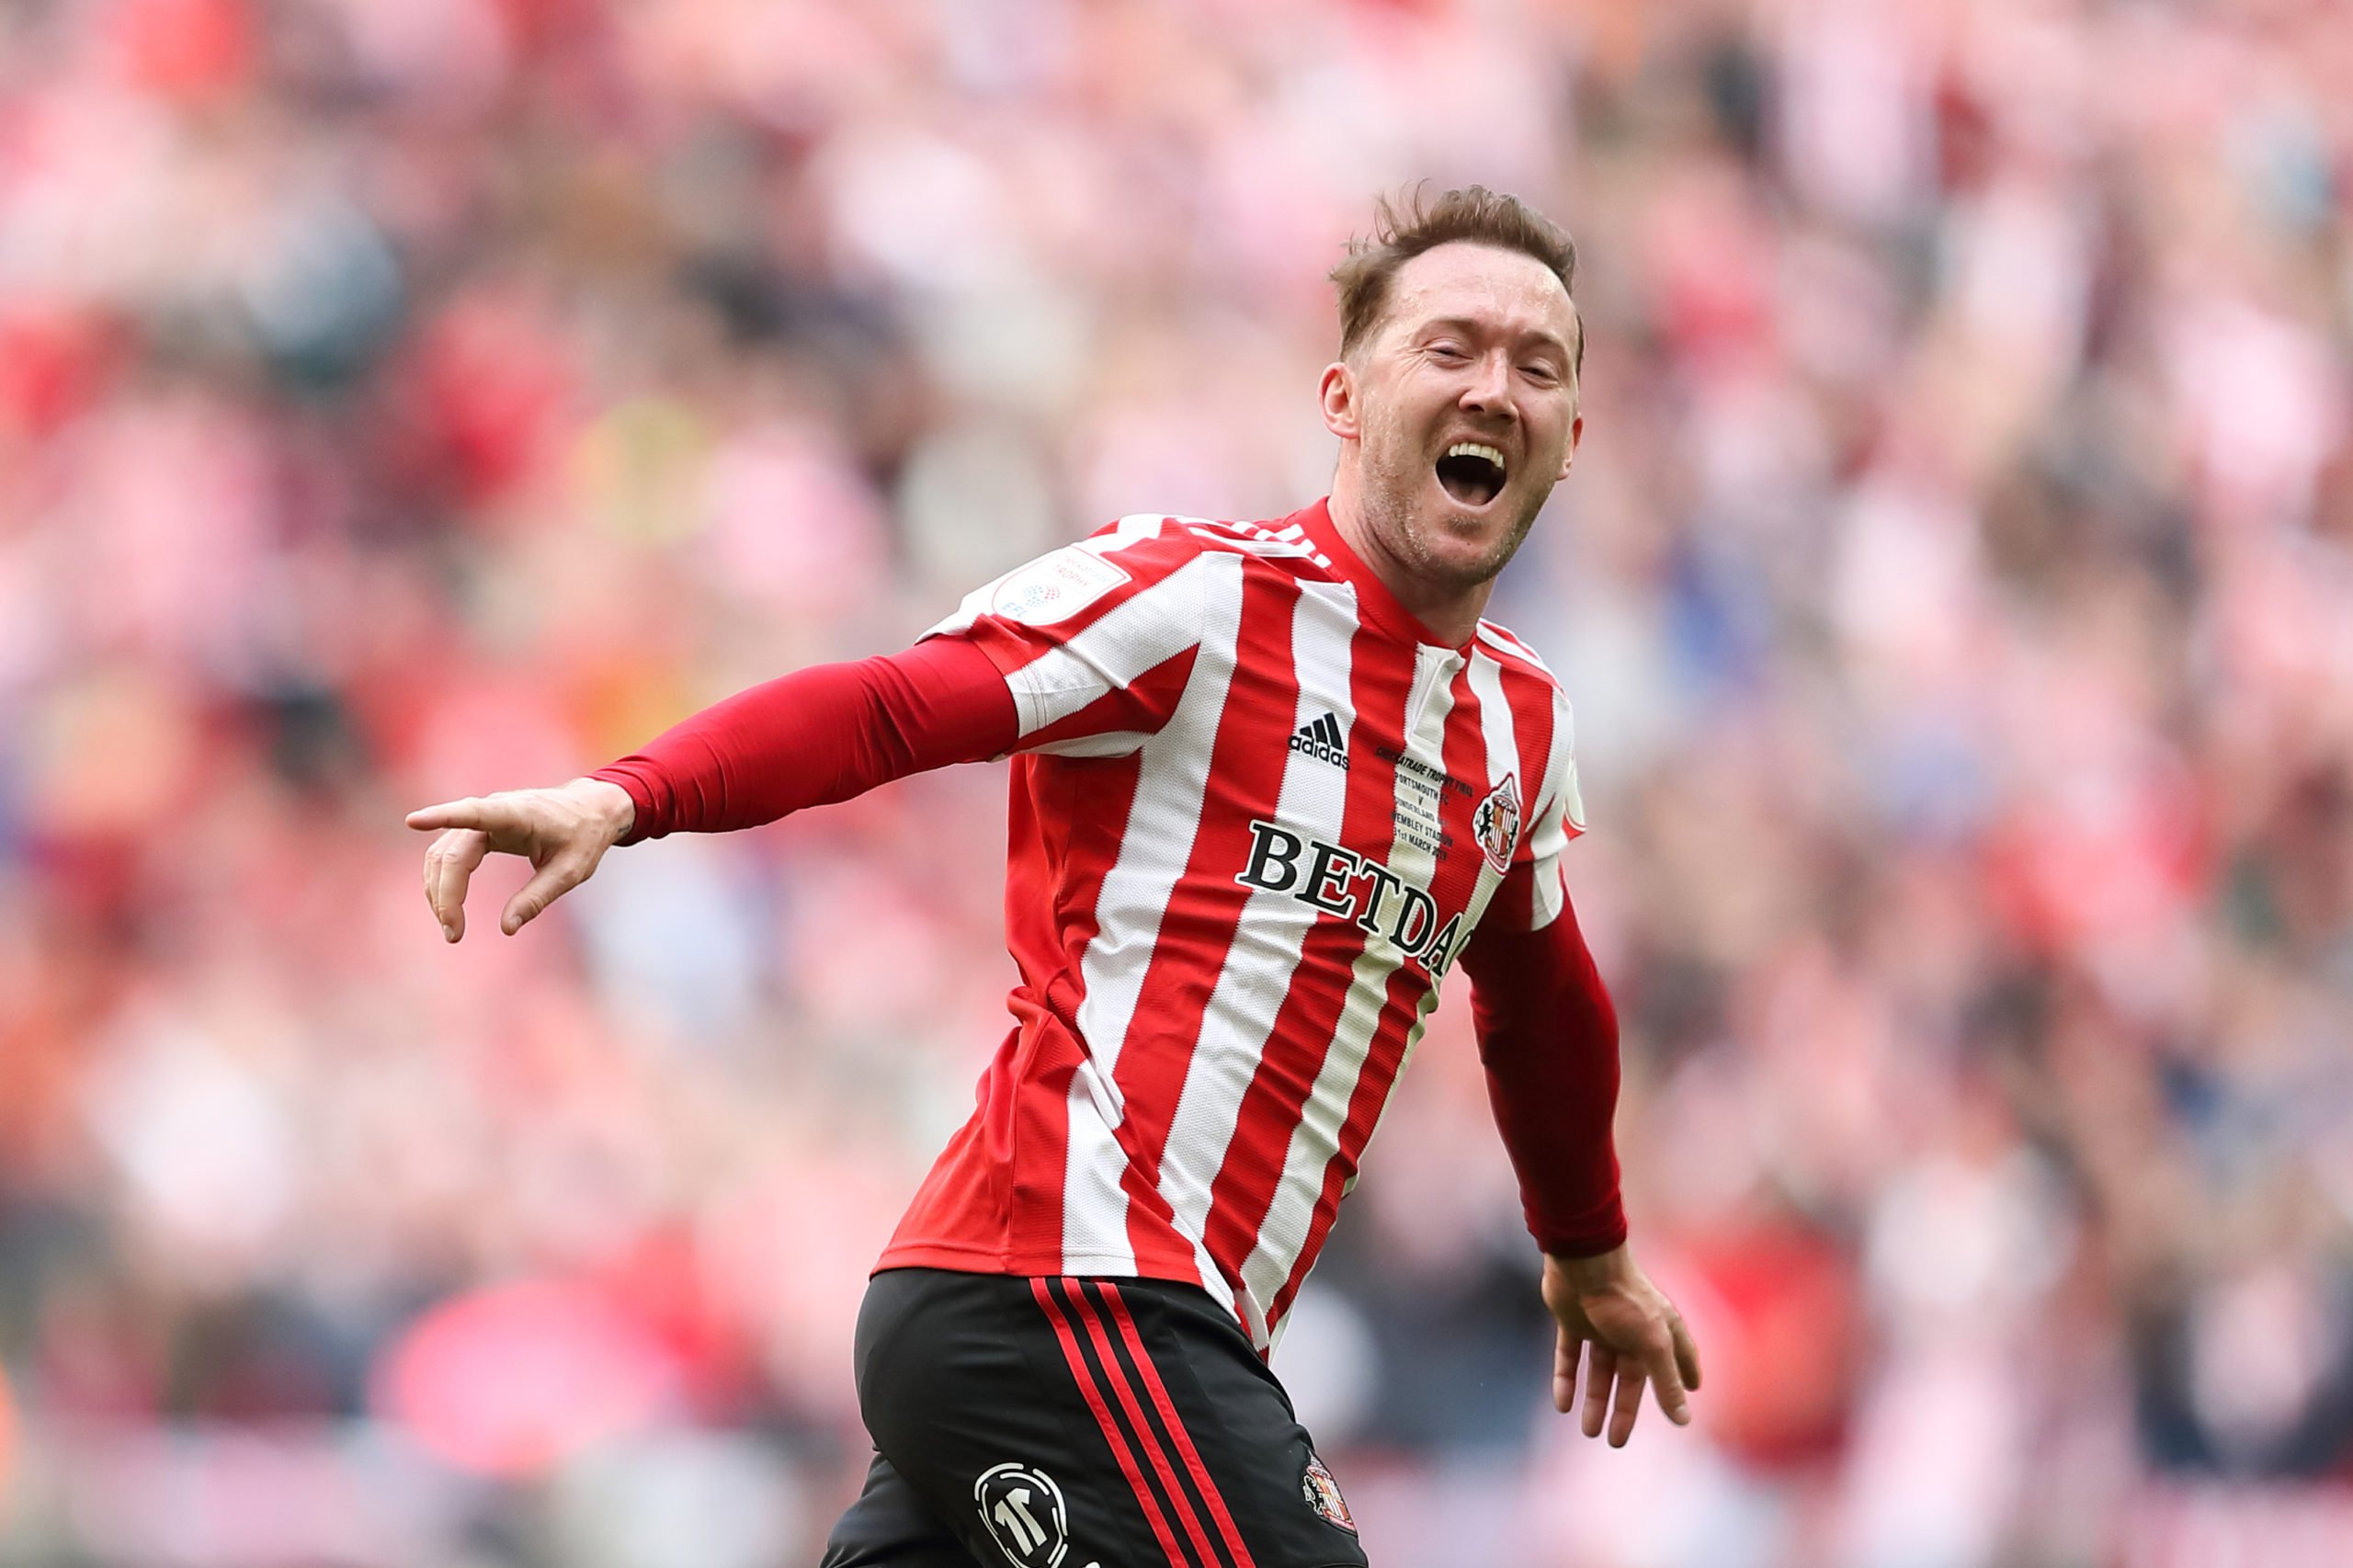 Former Celtic winger Aiden McGeady bags four assists in Sunderland rout